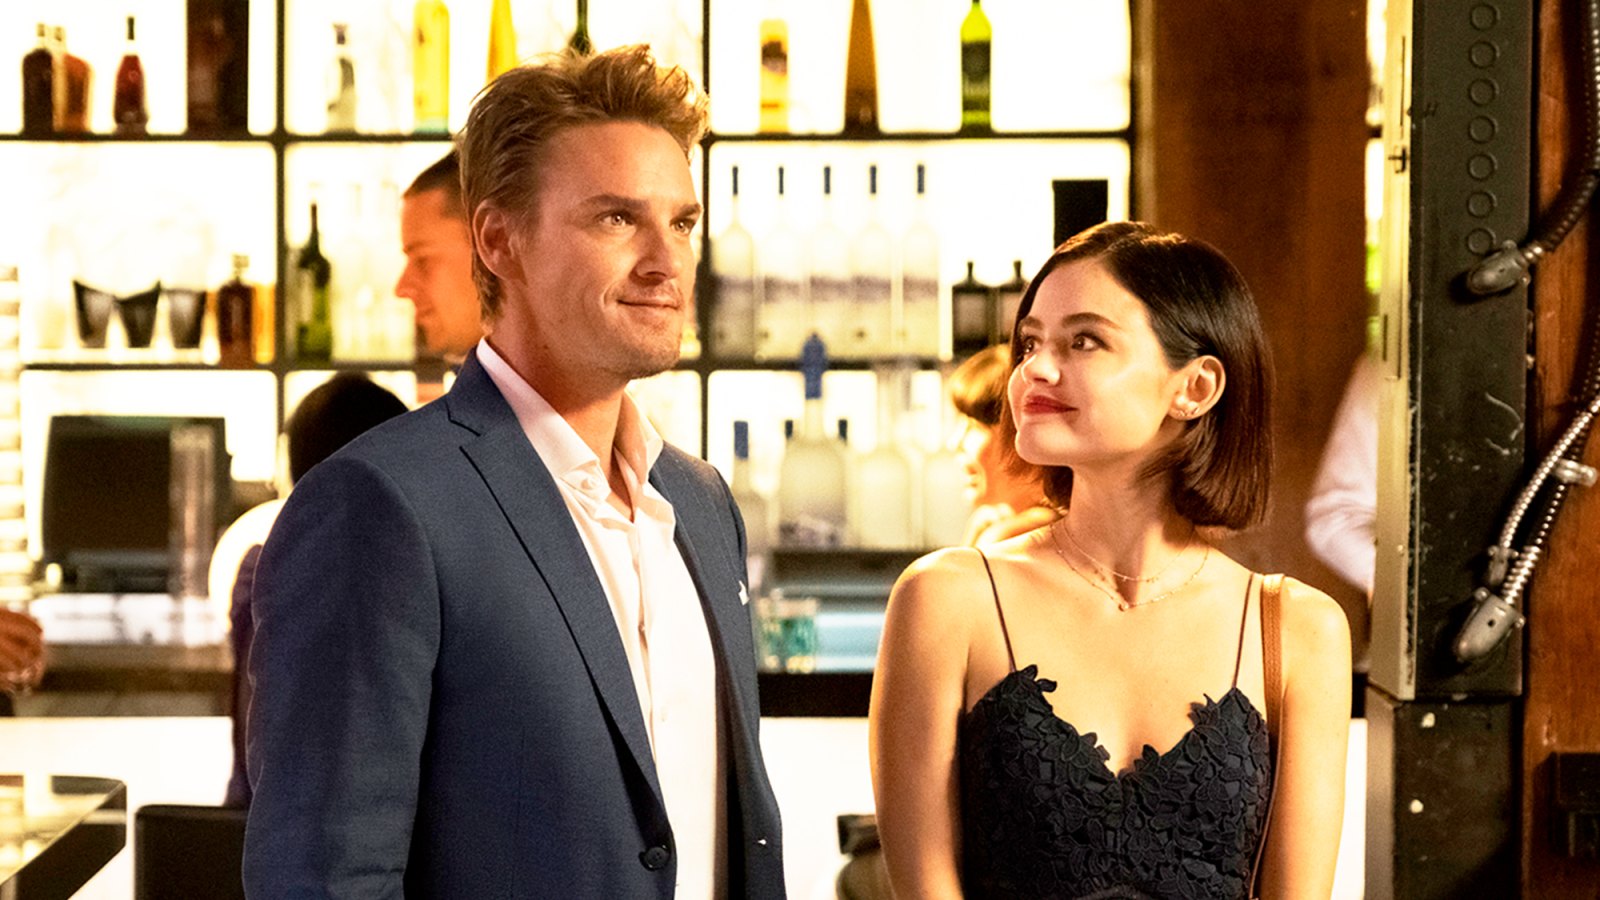 Riley Smith as Dr. Will Grant and Lucy Hale as Stella in ‘Life Sentence’